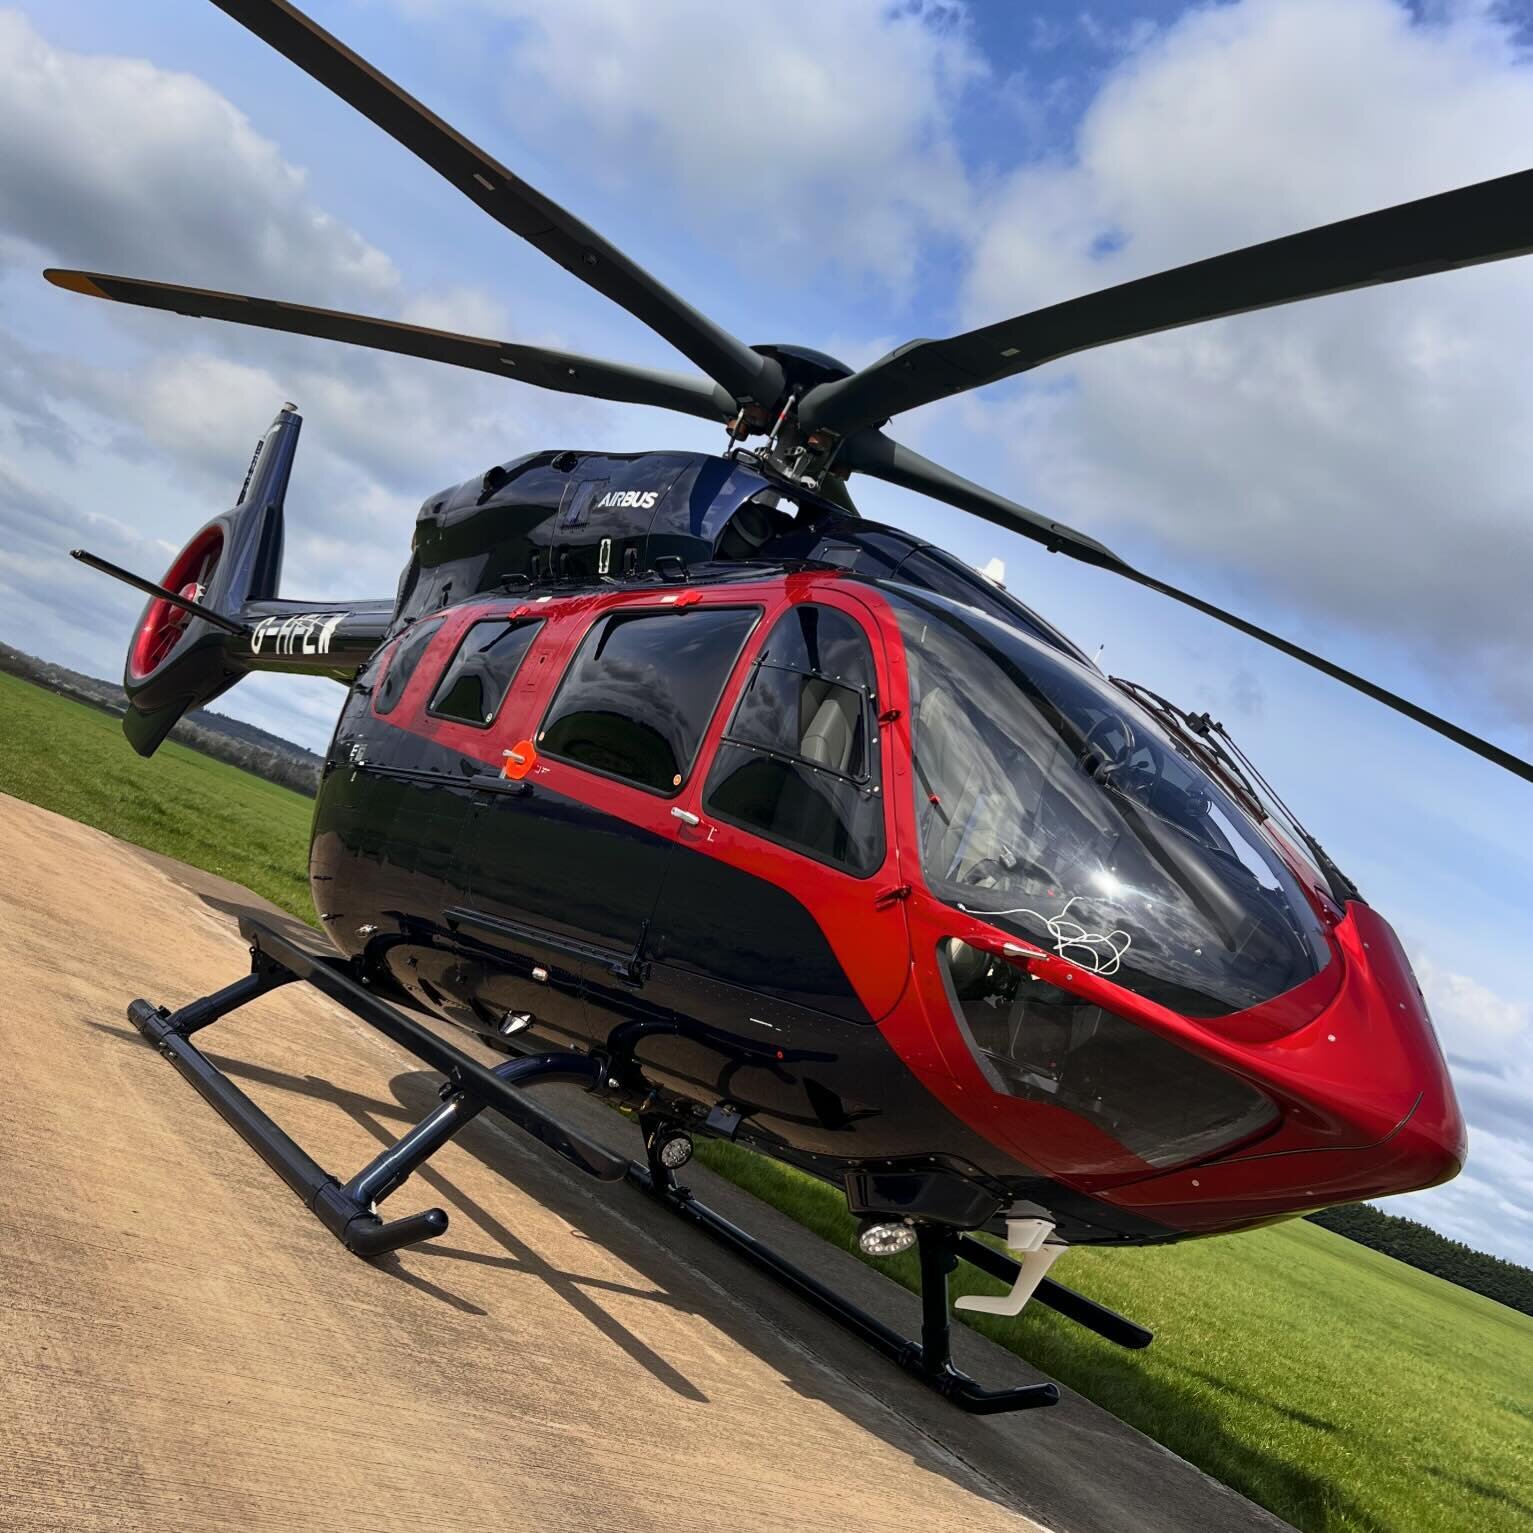 The latest H145 to join the U.K. register&hellip; 😍
- - - - - 
#h145
#h145d3
#airbush145 
#ec145
#airbushelicopters 
#helicopterpilotlife